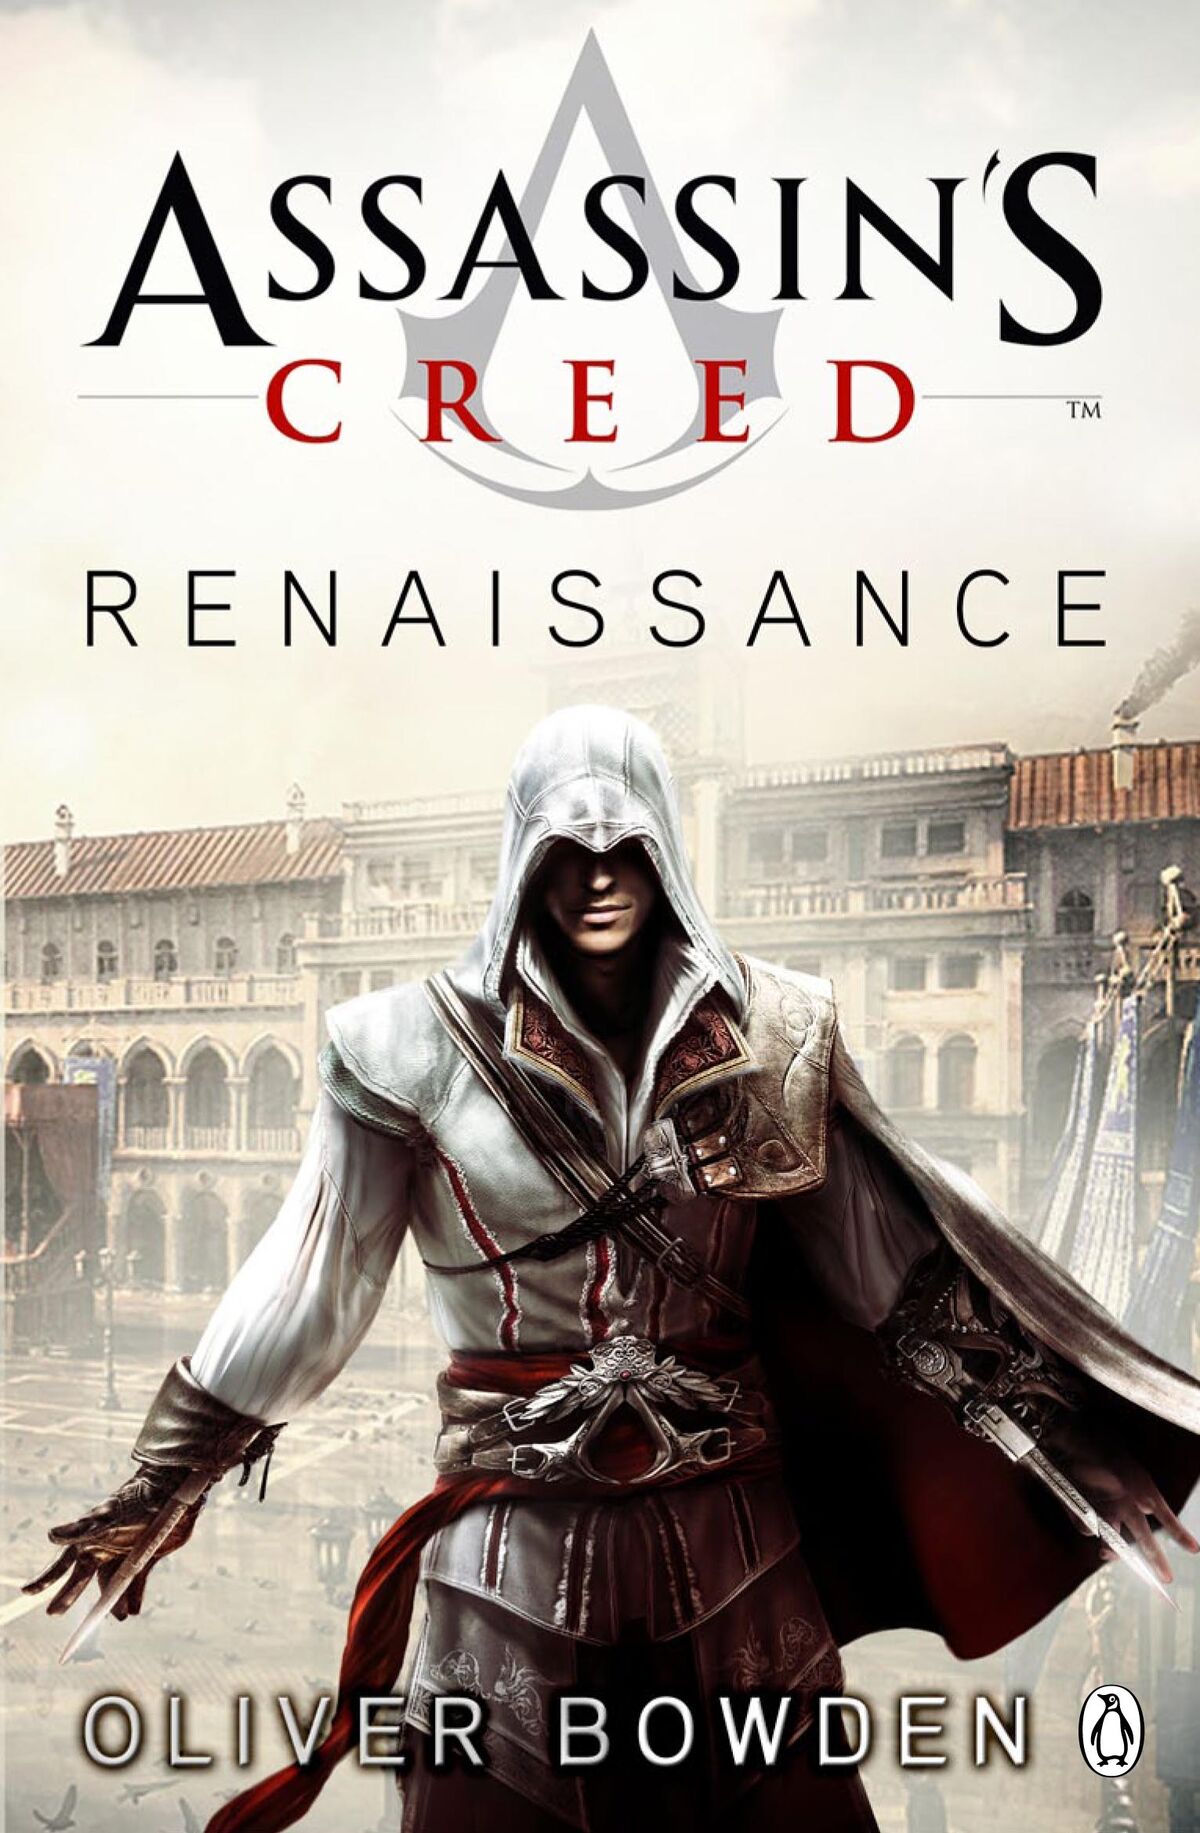 Assassin's Creed 1 Free Download PC Game  Assassins creed bloodlines,  Final fantasy vii, Assassins creed 1